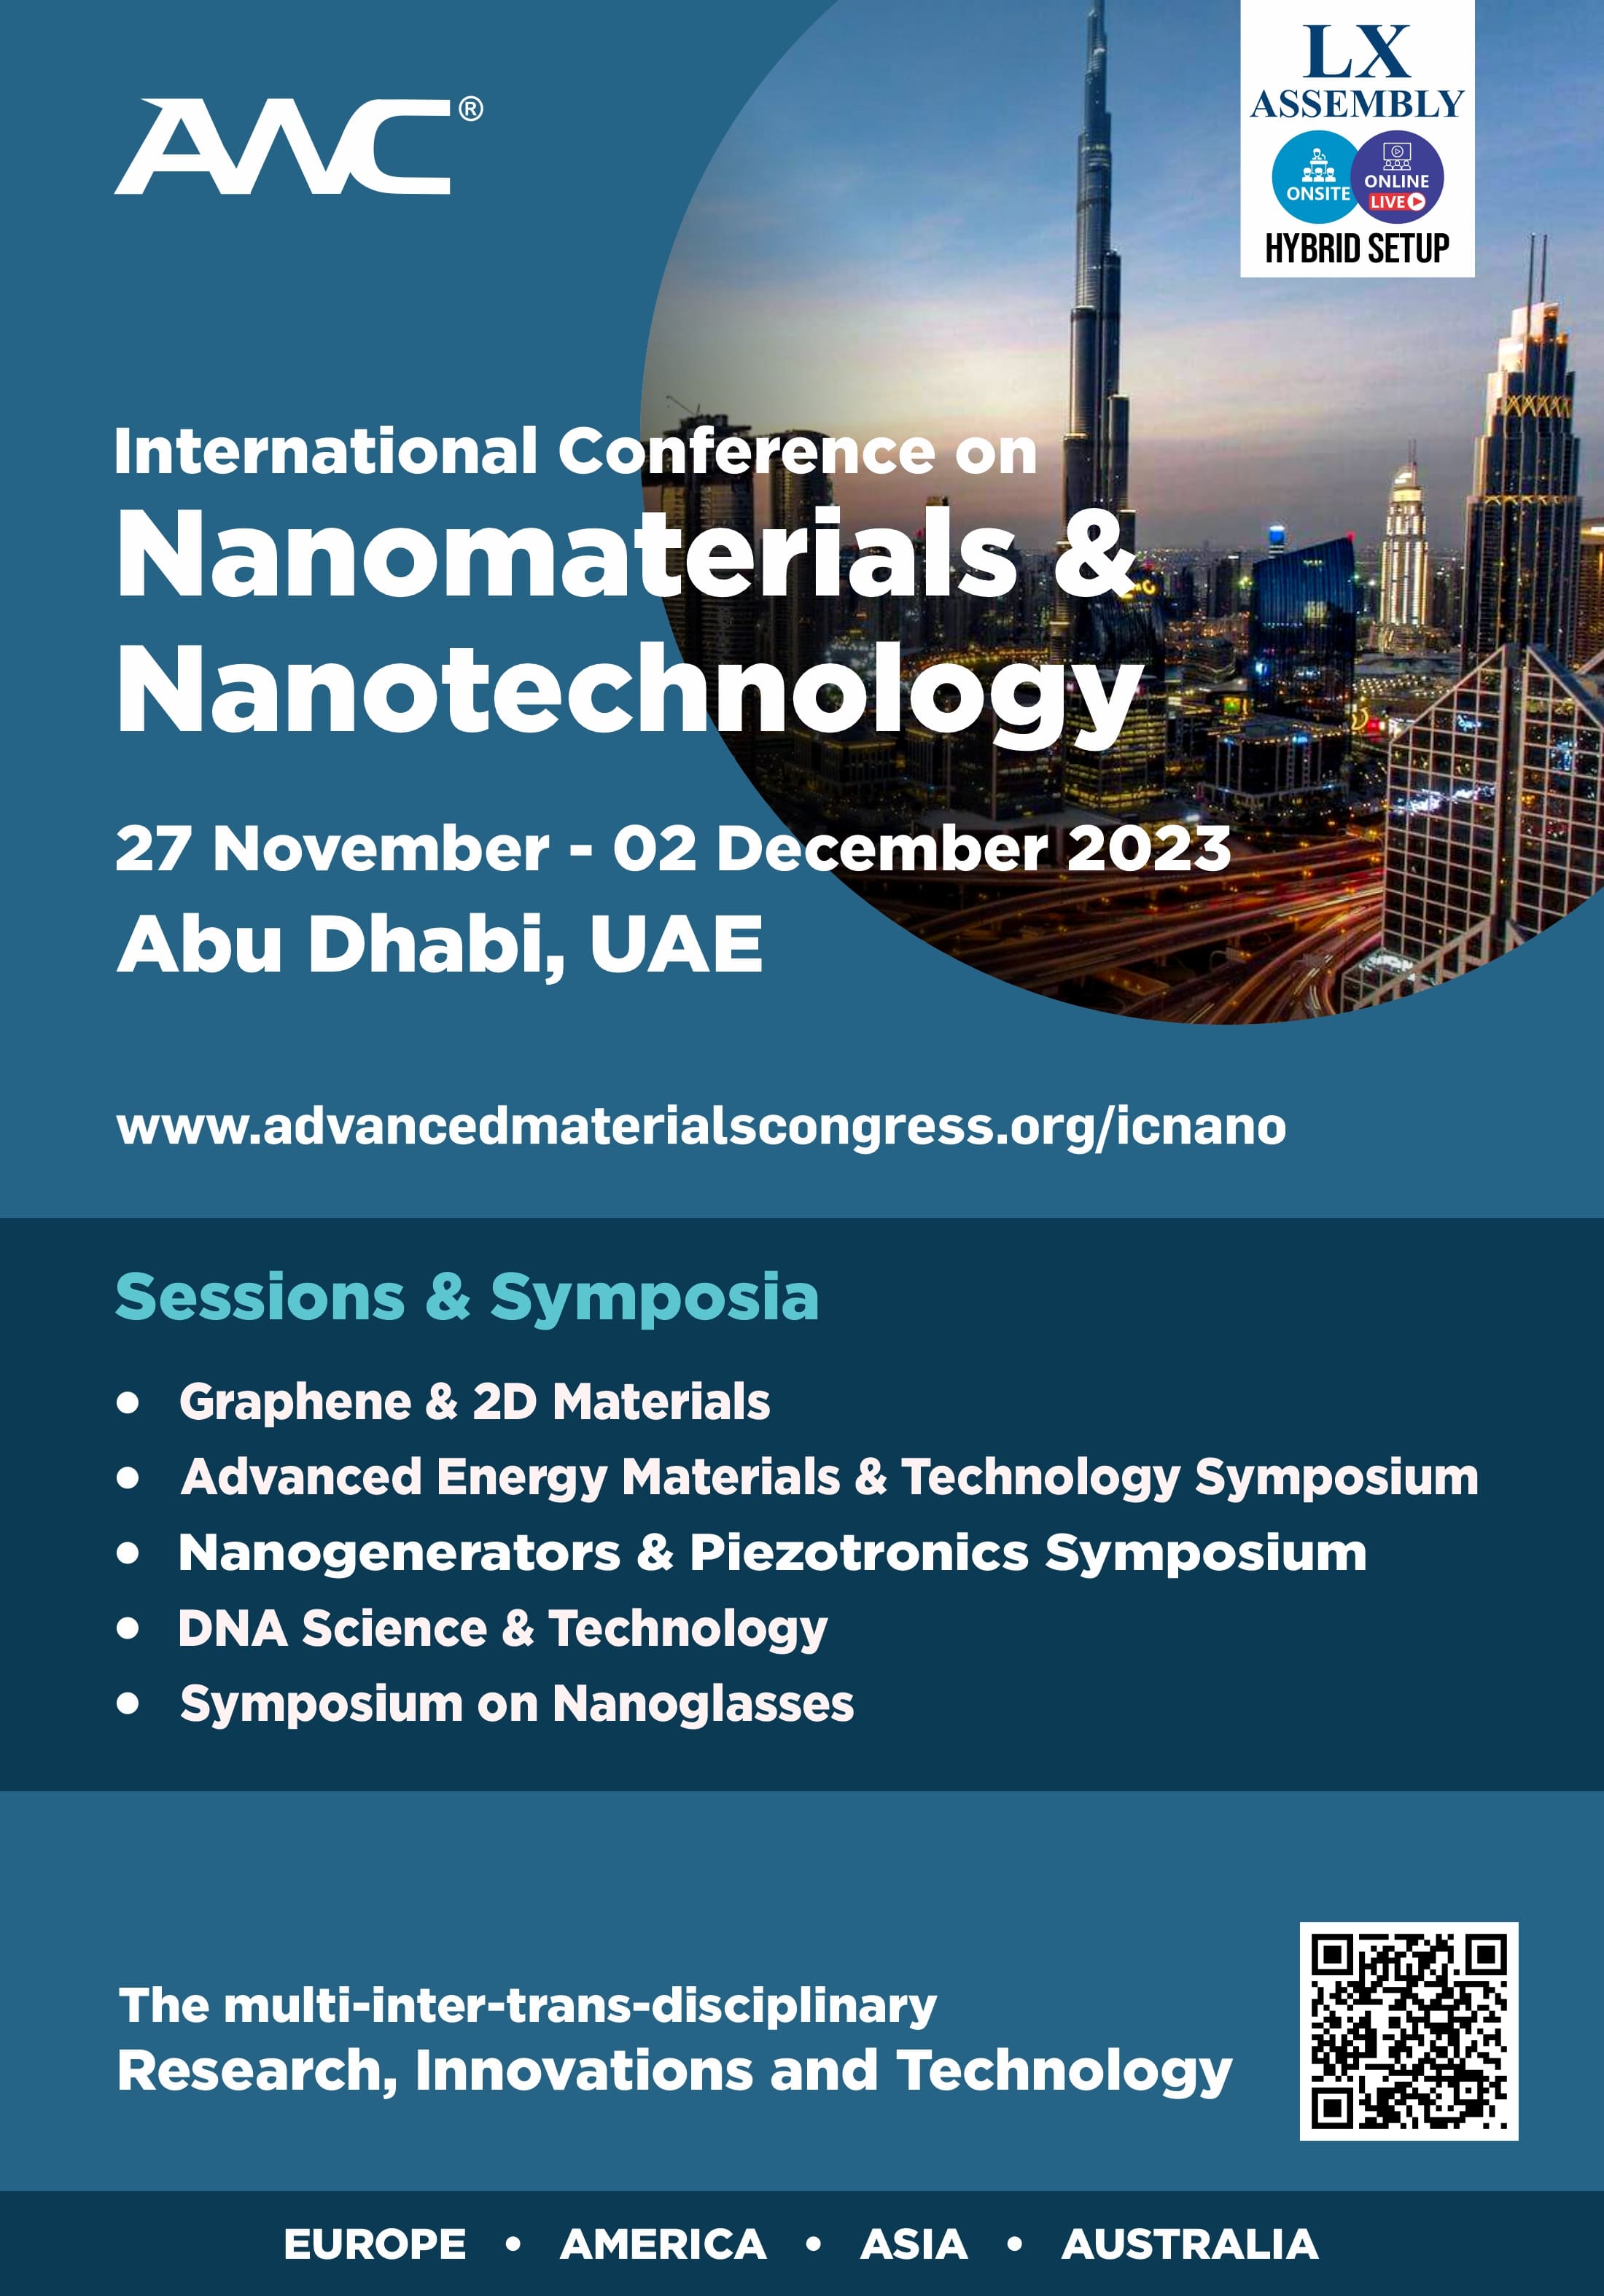 International Summit on Materials Science and Nano Science